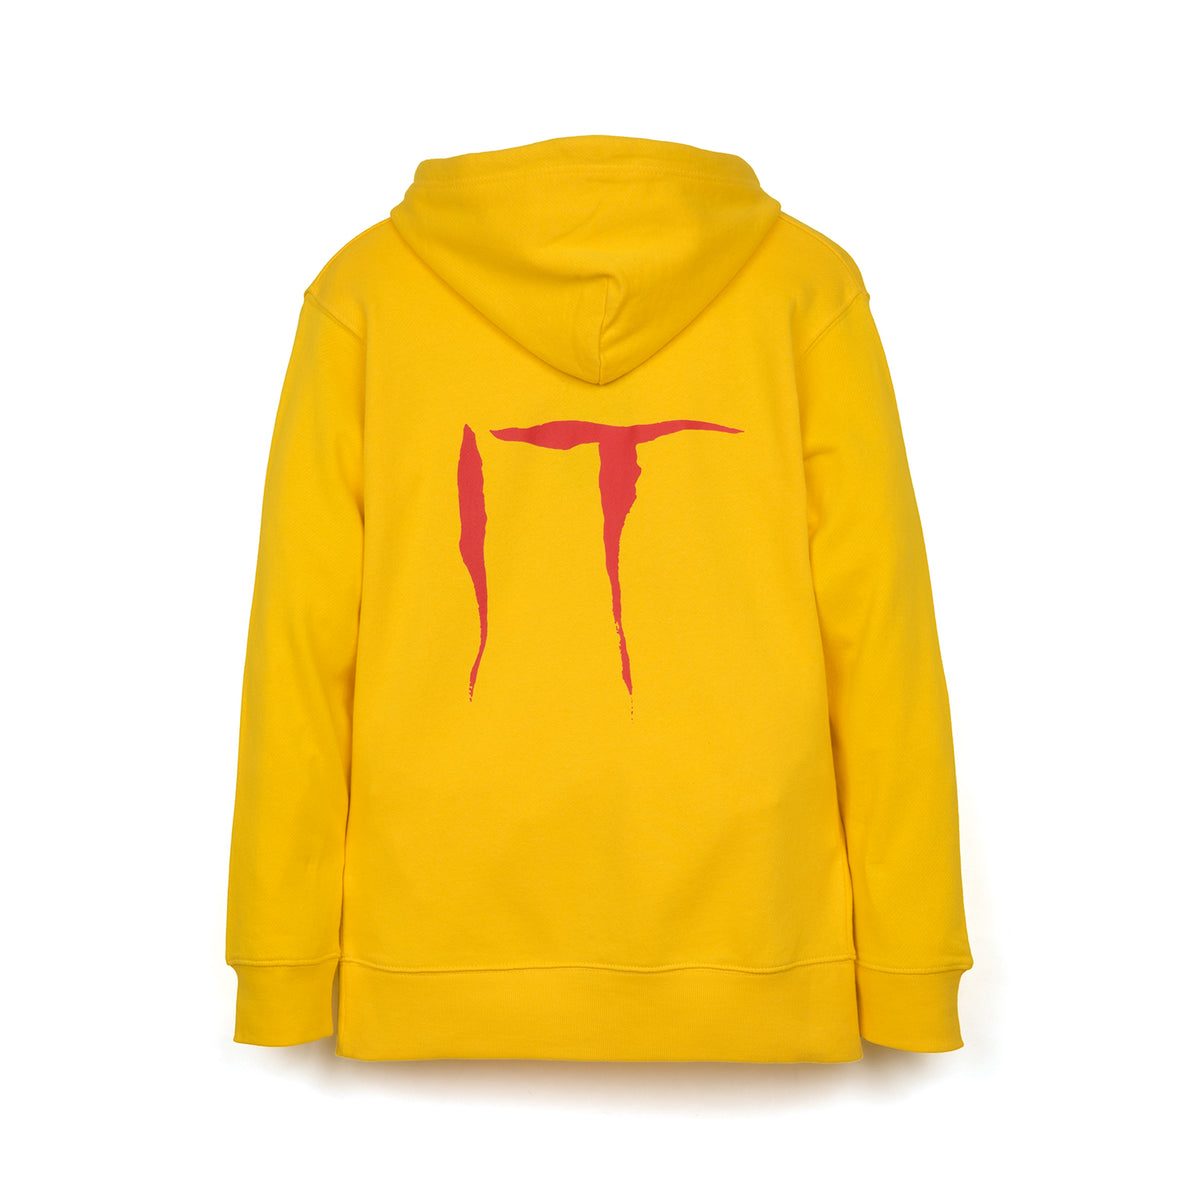 Medicom Toy | MLE 'IT' Pullover Hoodie Yellow - Concrete